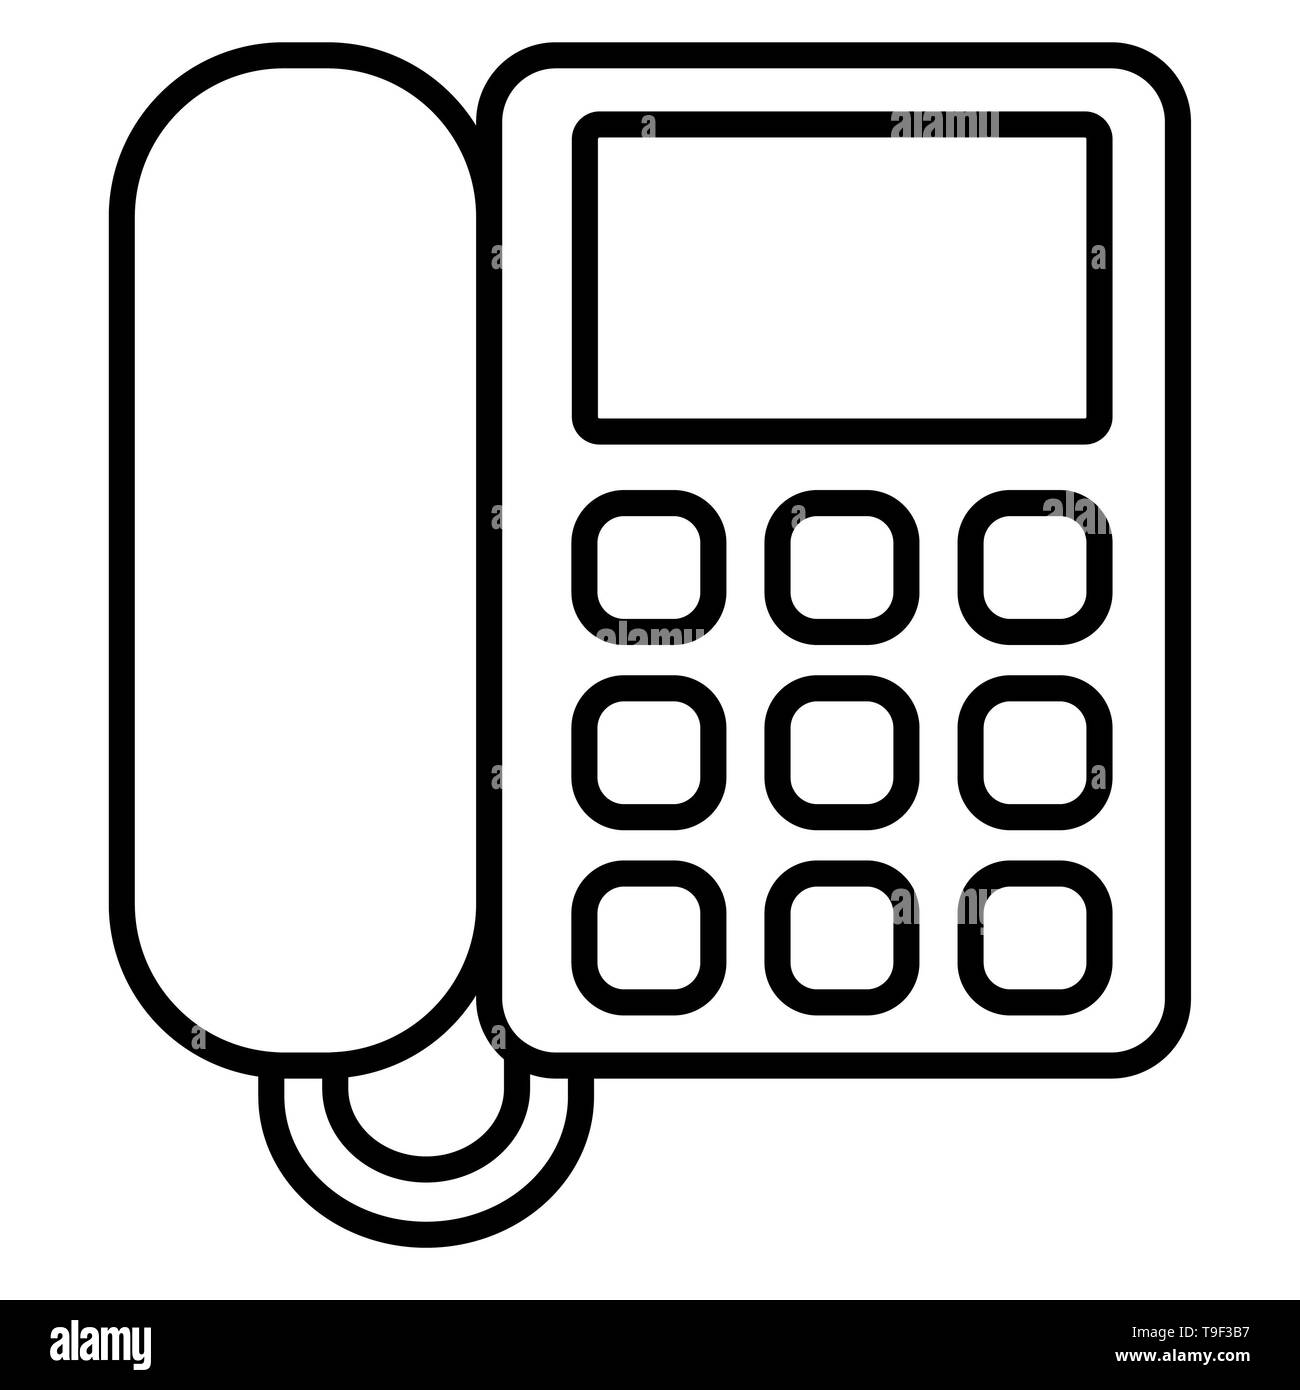 Phone Icon, Vector Illustration, Business Outline Stock Photo